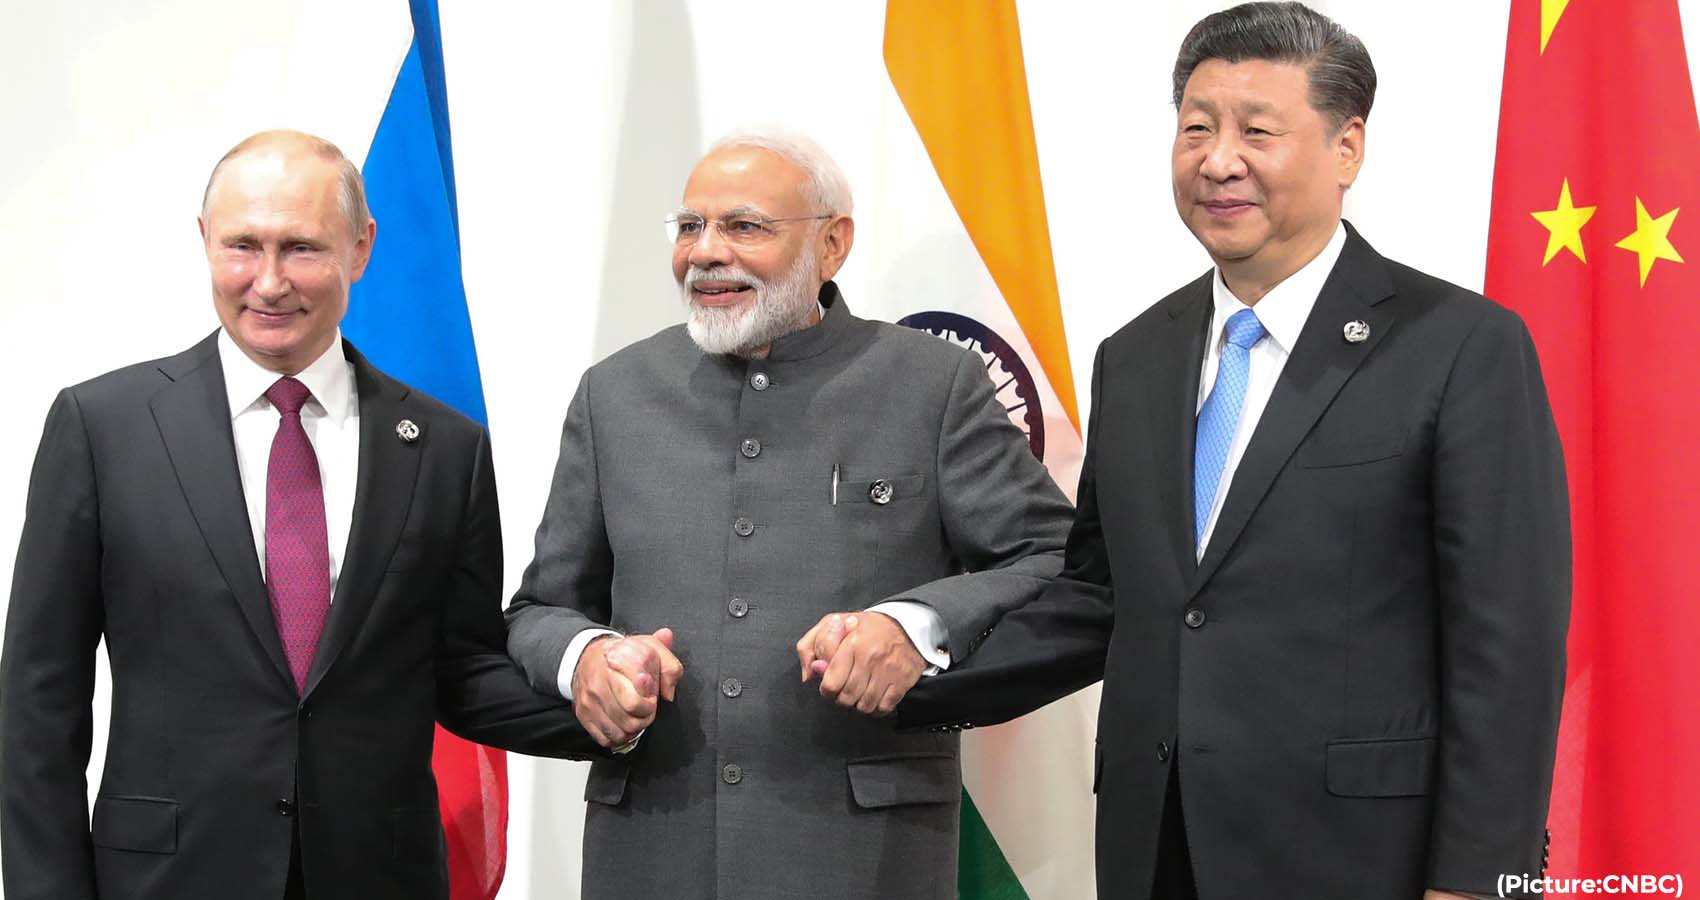 Choosing The West Over Russia Could Make New Delhi A Great Power